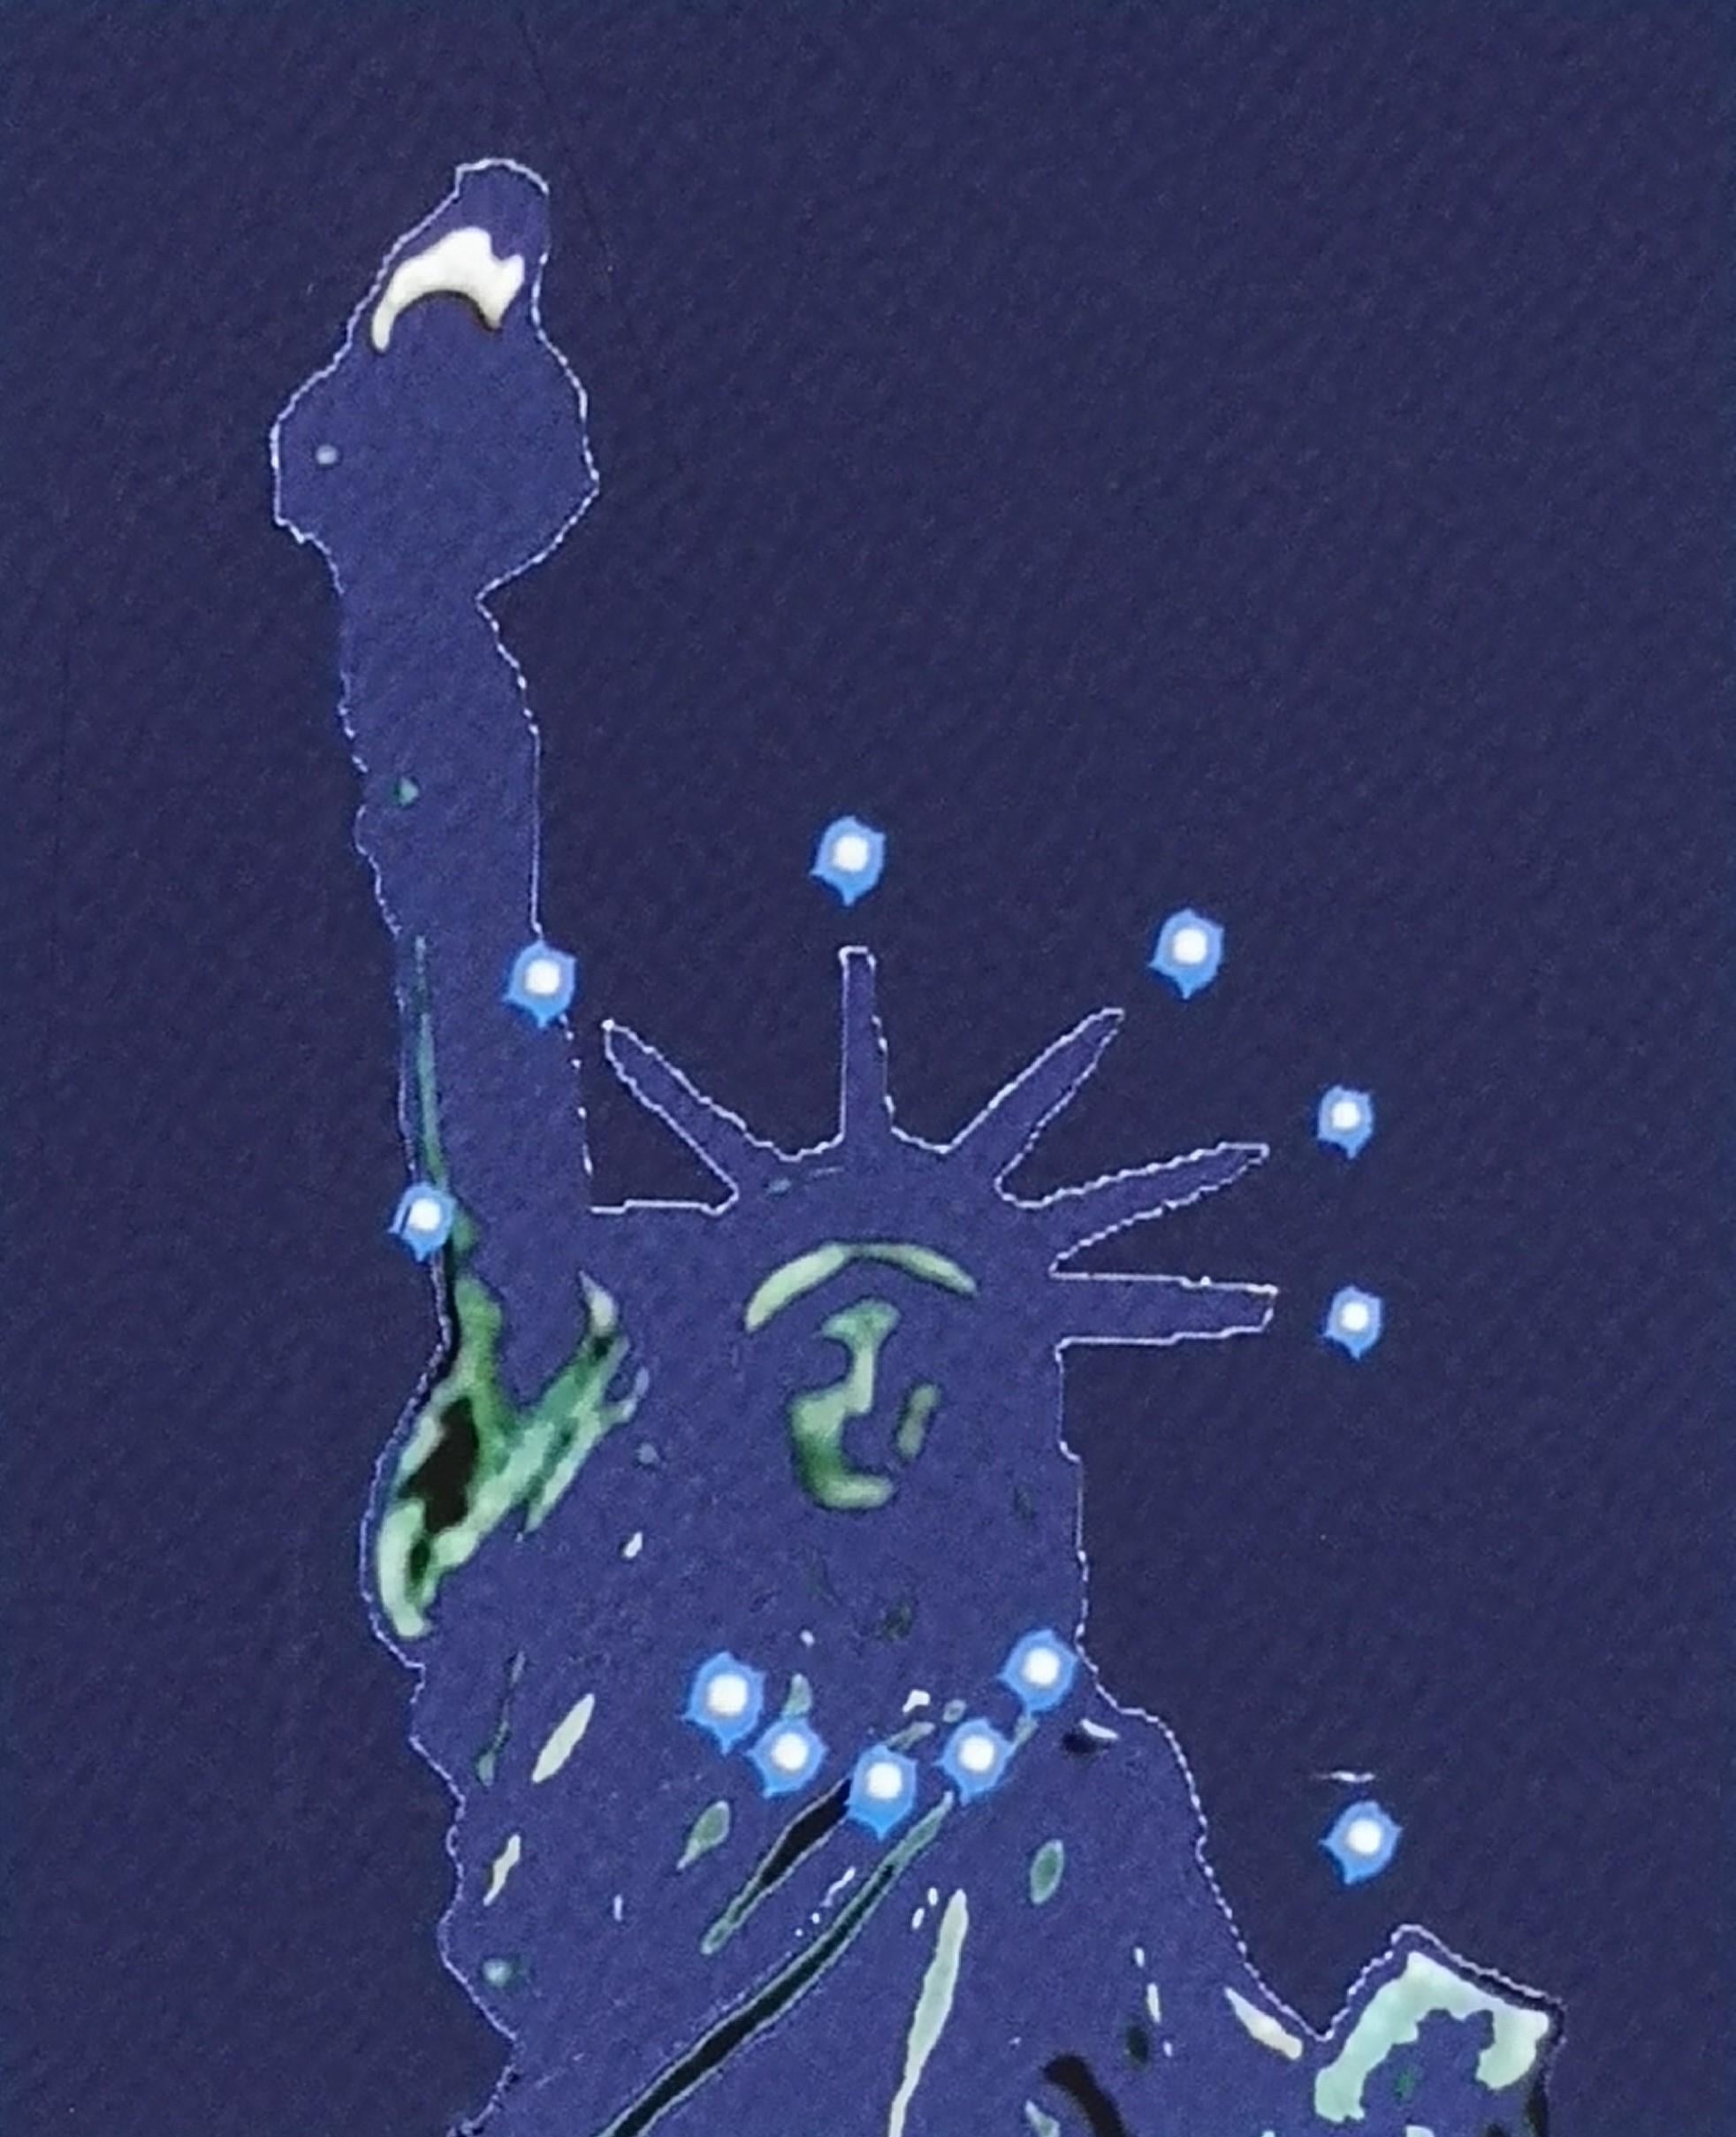 LIBERTY BEJEWELED, Study for 12 Celestial Lights over Liberty - Performance Print by Bellessort